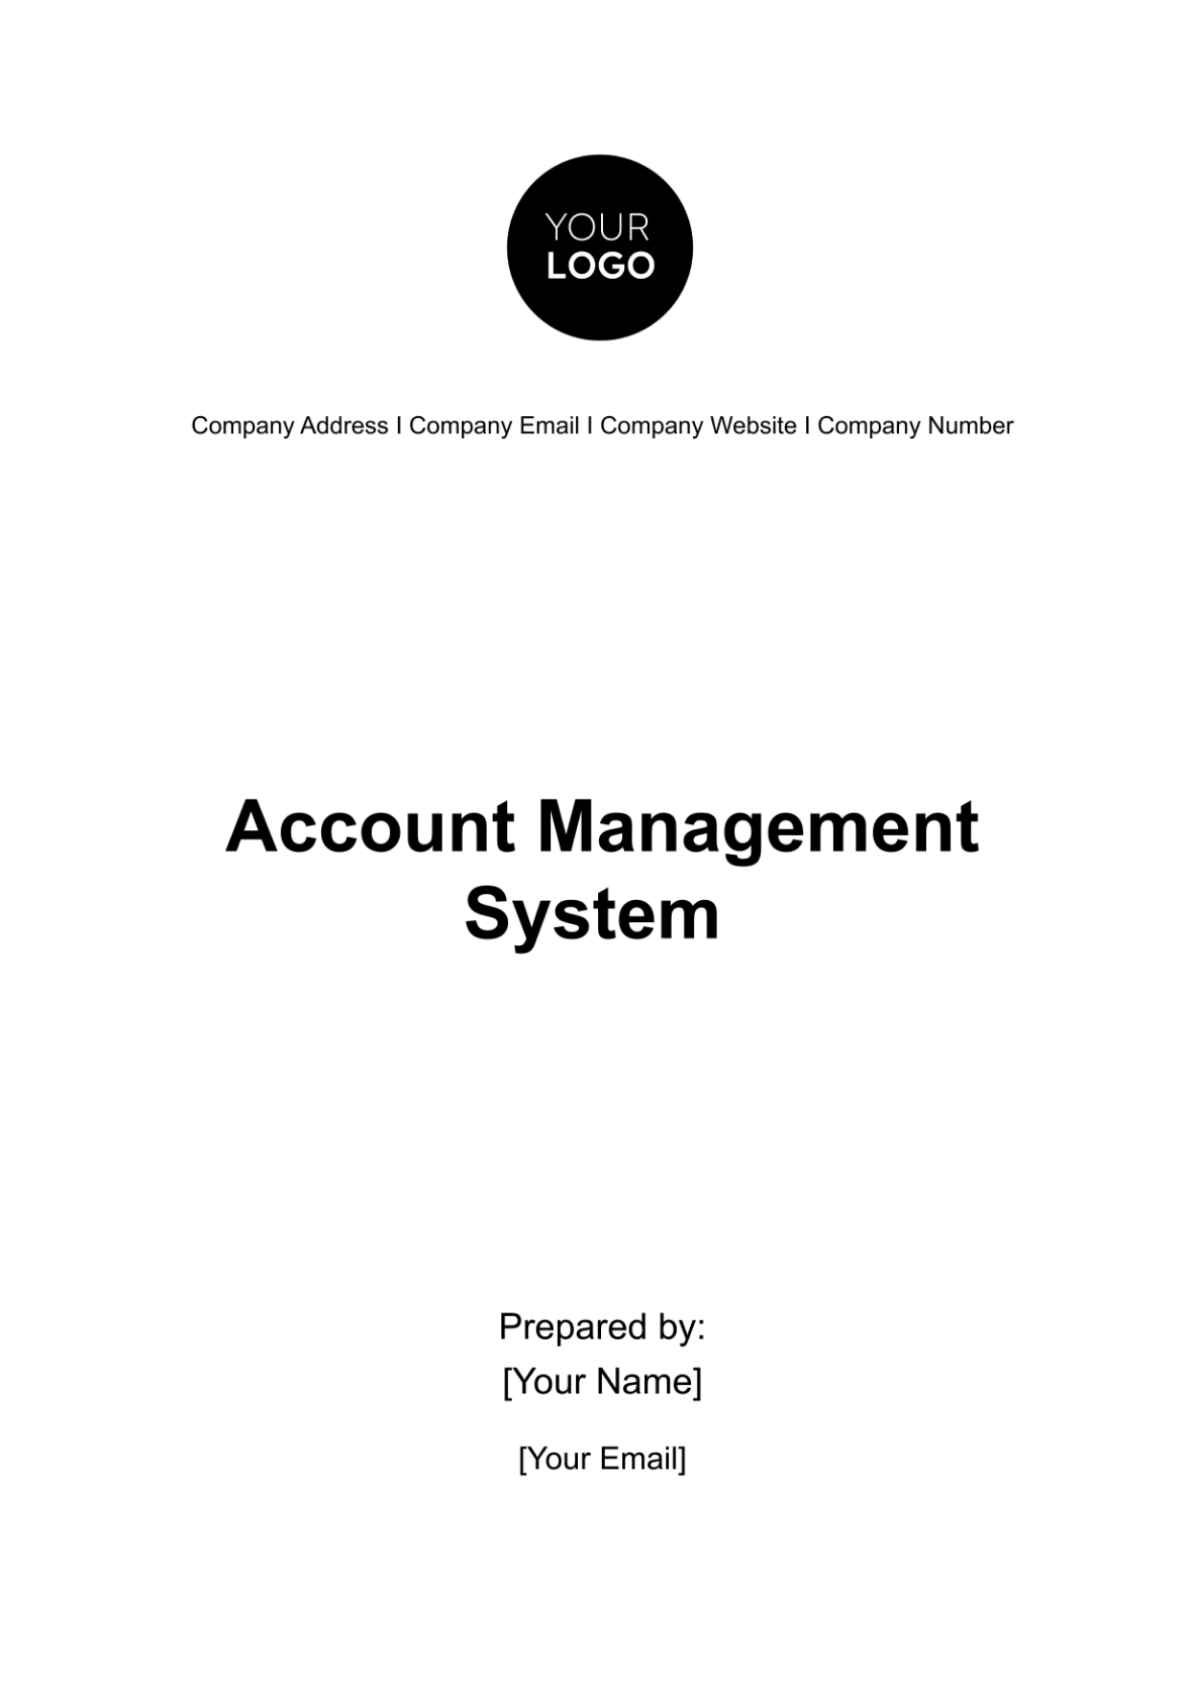 Account Management System Template